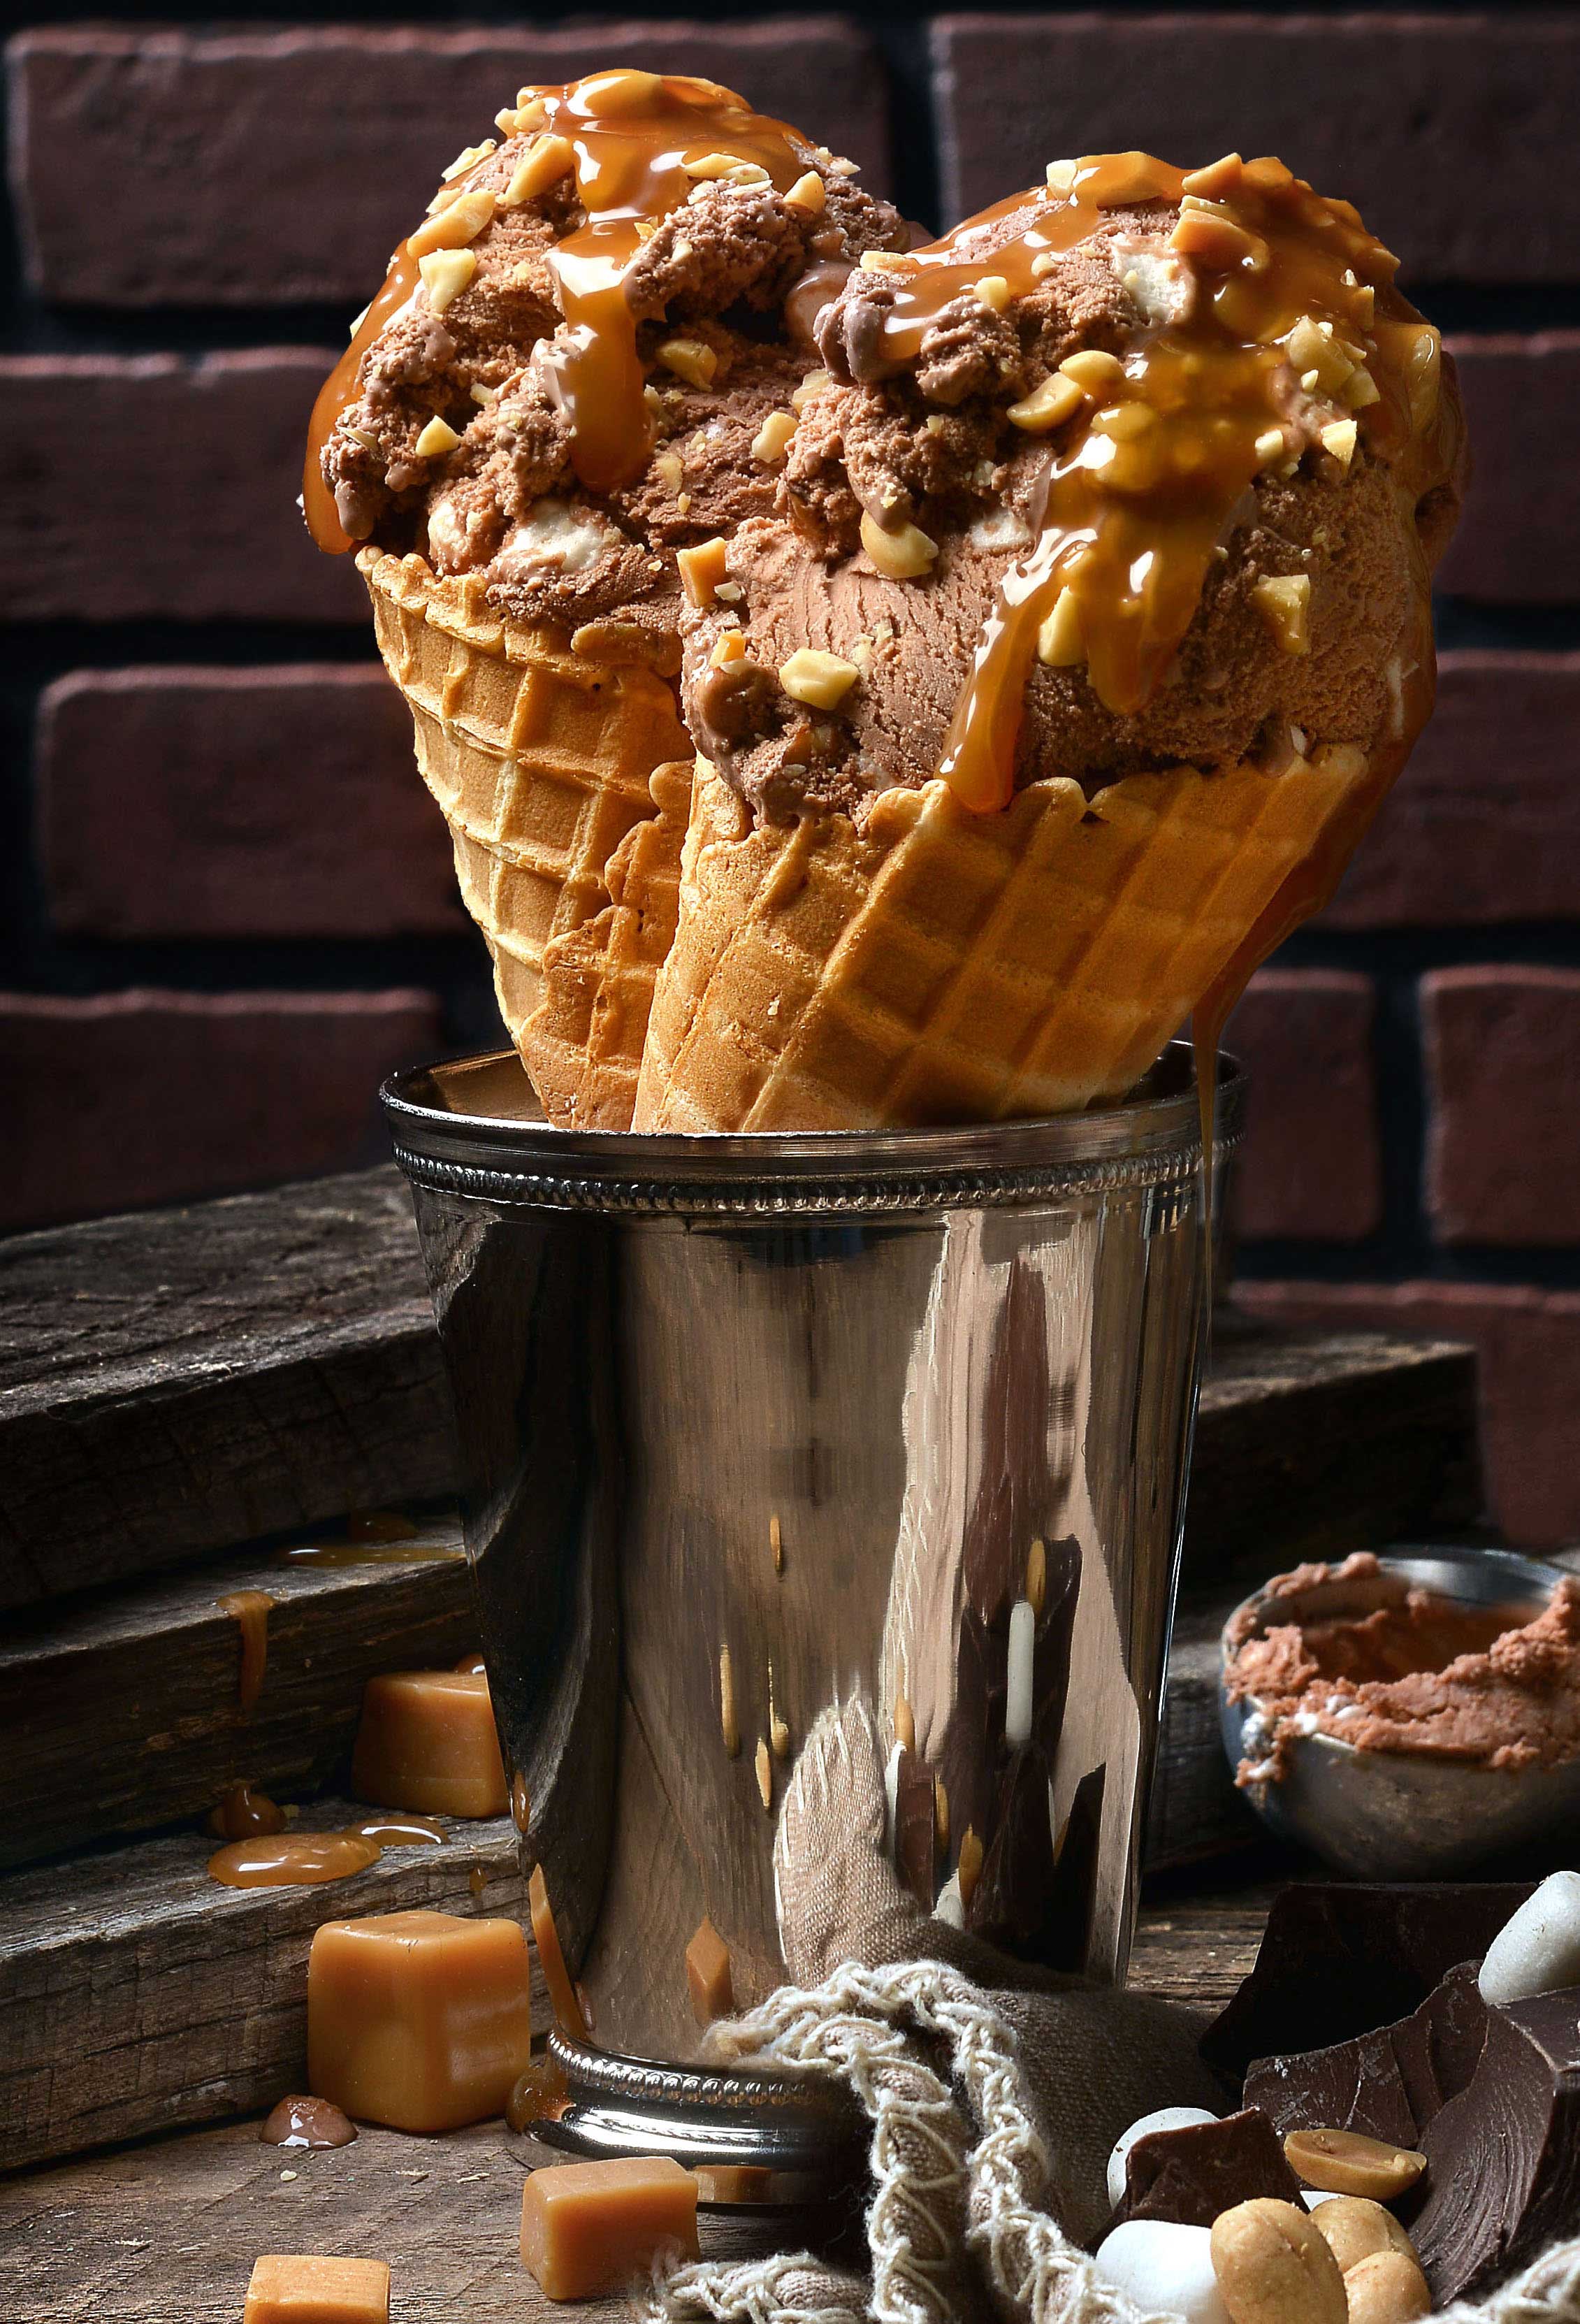 mike wepplo natural photography rocky road ice cream scoop